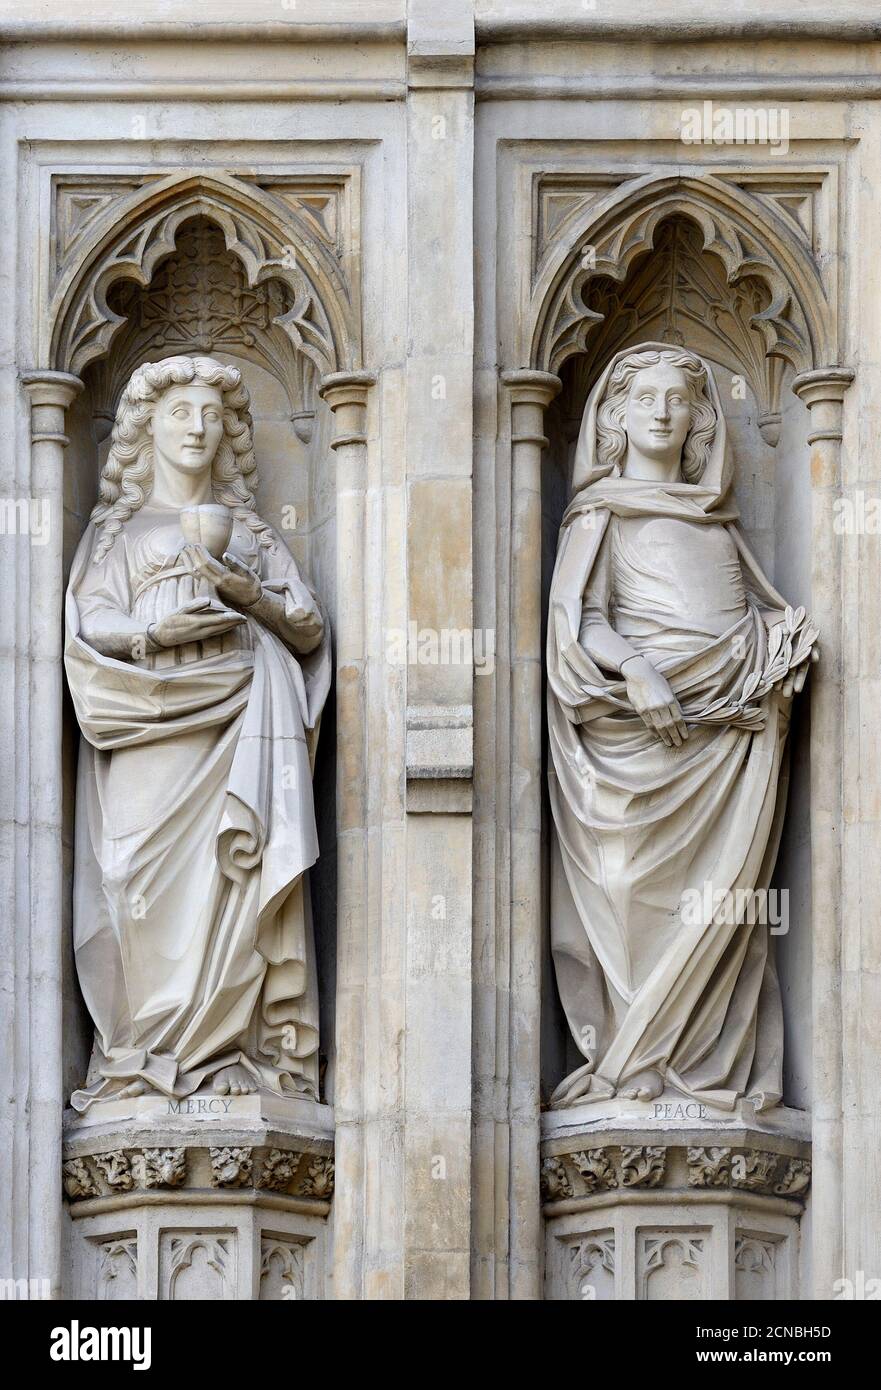 London, England, UK. West facade of Westminster Abbey: allegorical statues representing Mercy and Peace Stock Photo